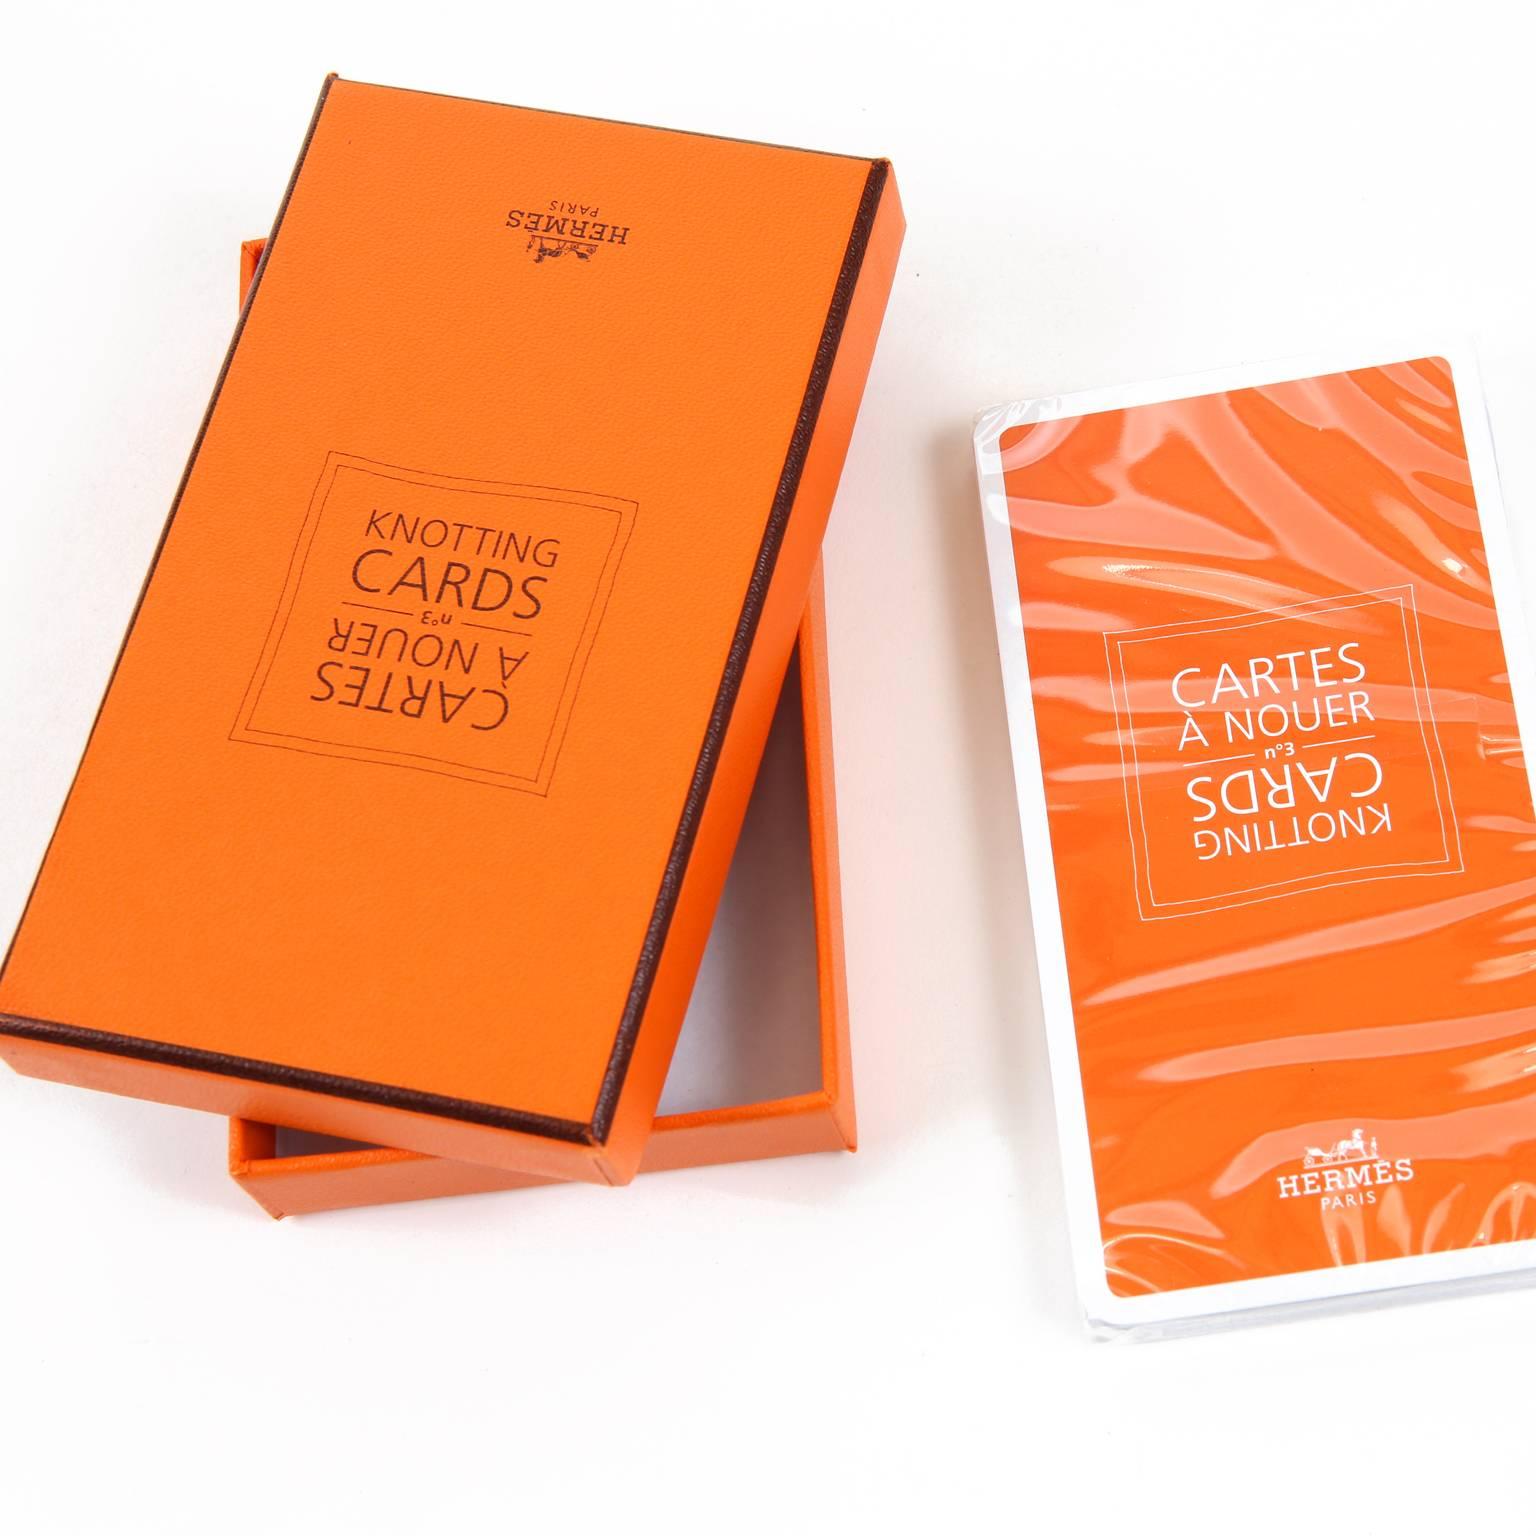 These authentic Hermès Scarf Knotting Cards are new with the box.  Illustrations with step by step directions and photos of the finished look on each card.  A perfect approach to finding new and creative ways to enjoy any scarf collection.  
A255
 
